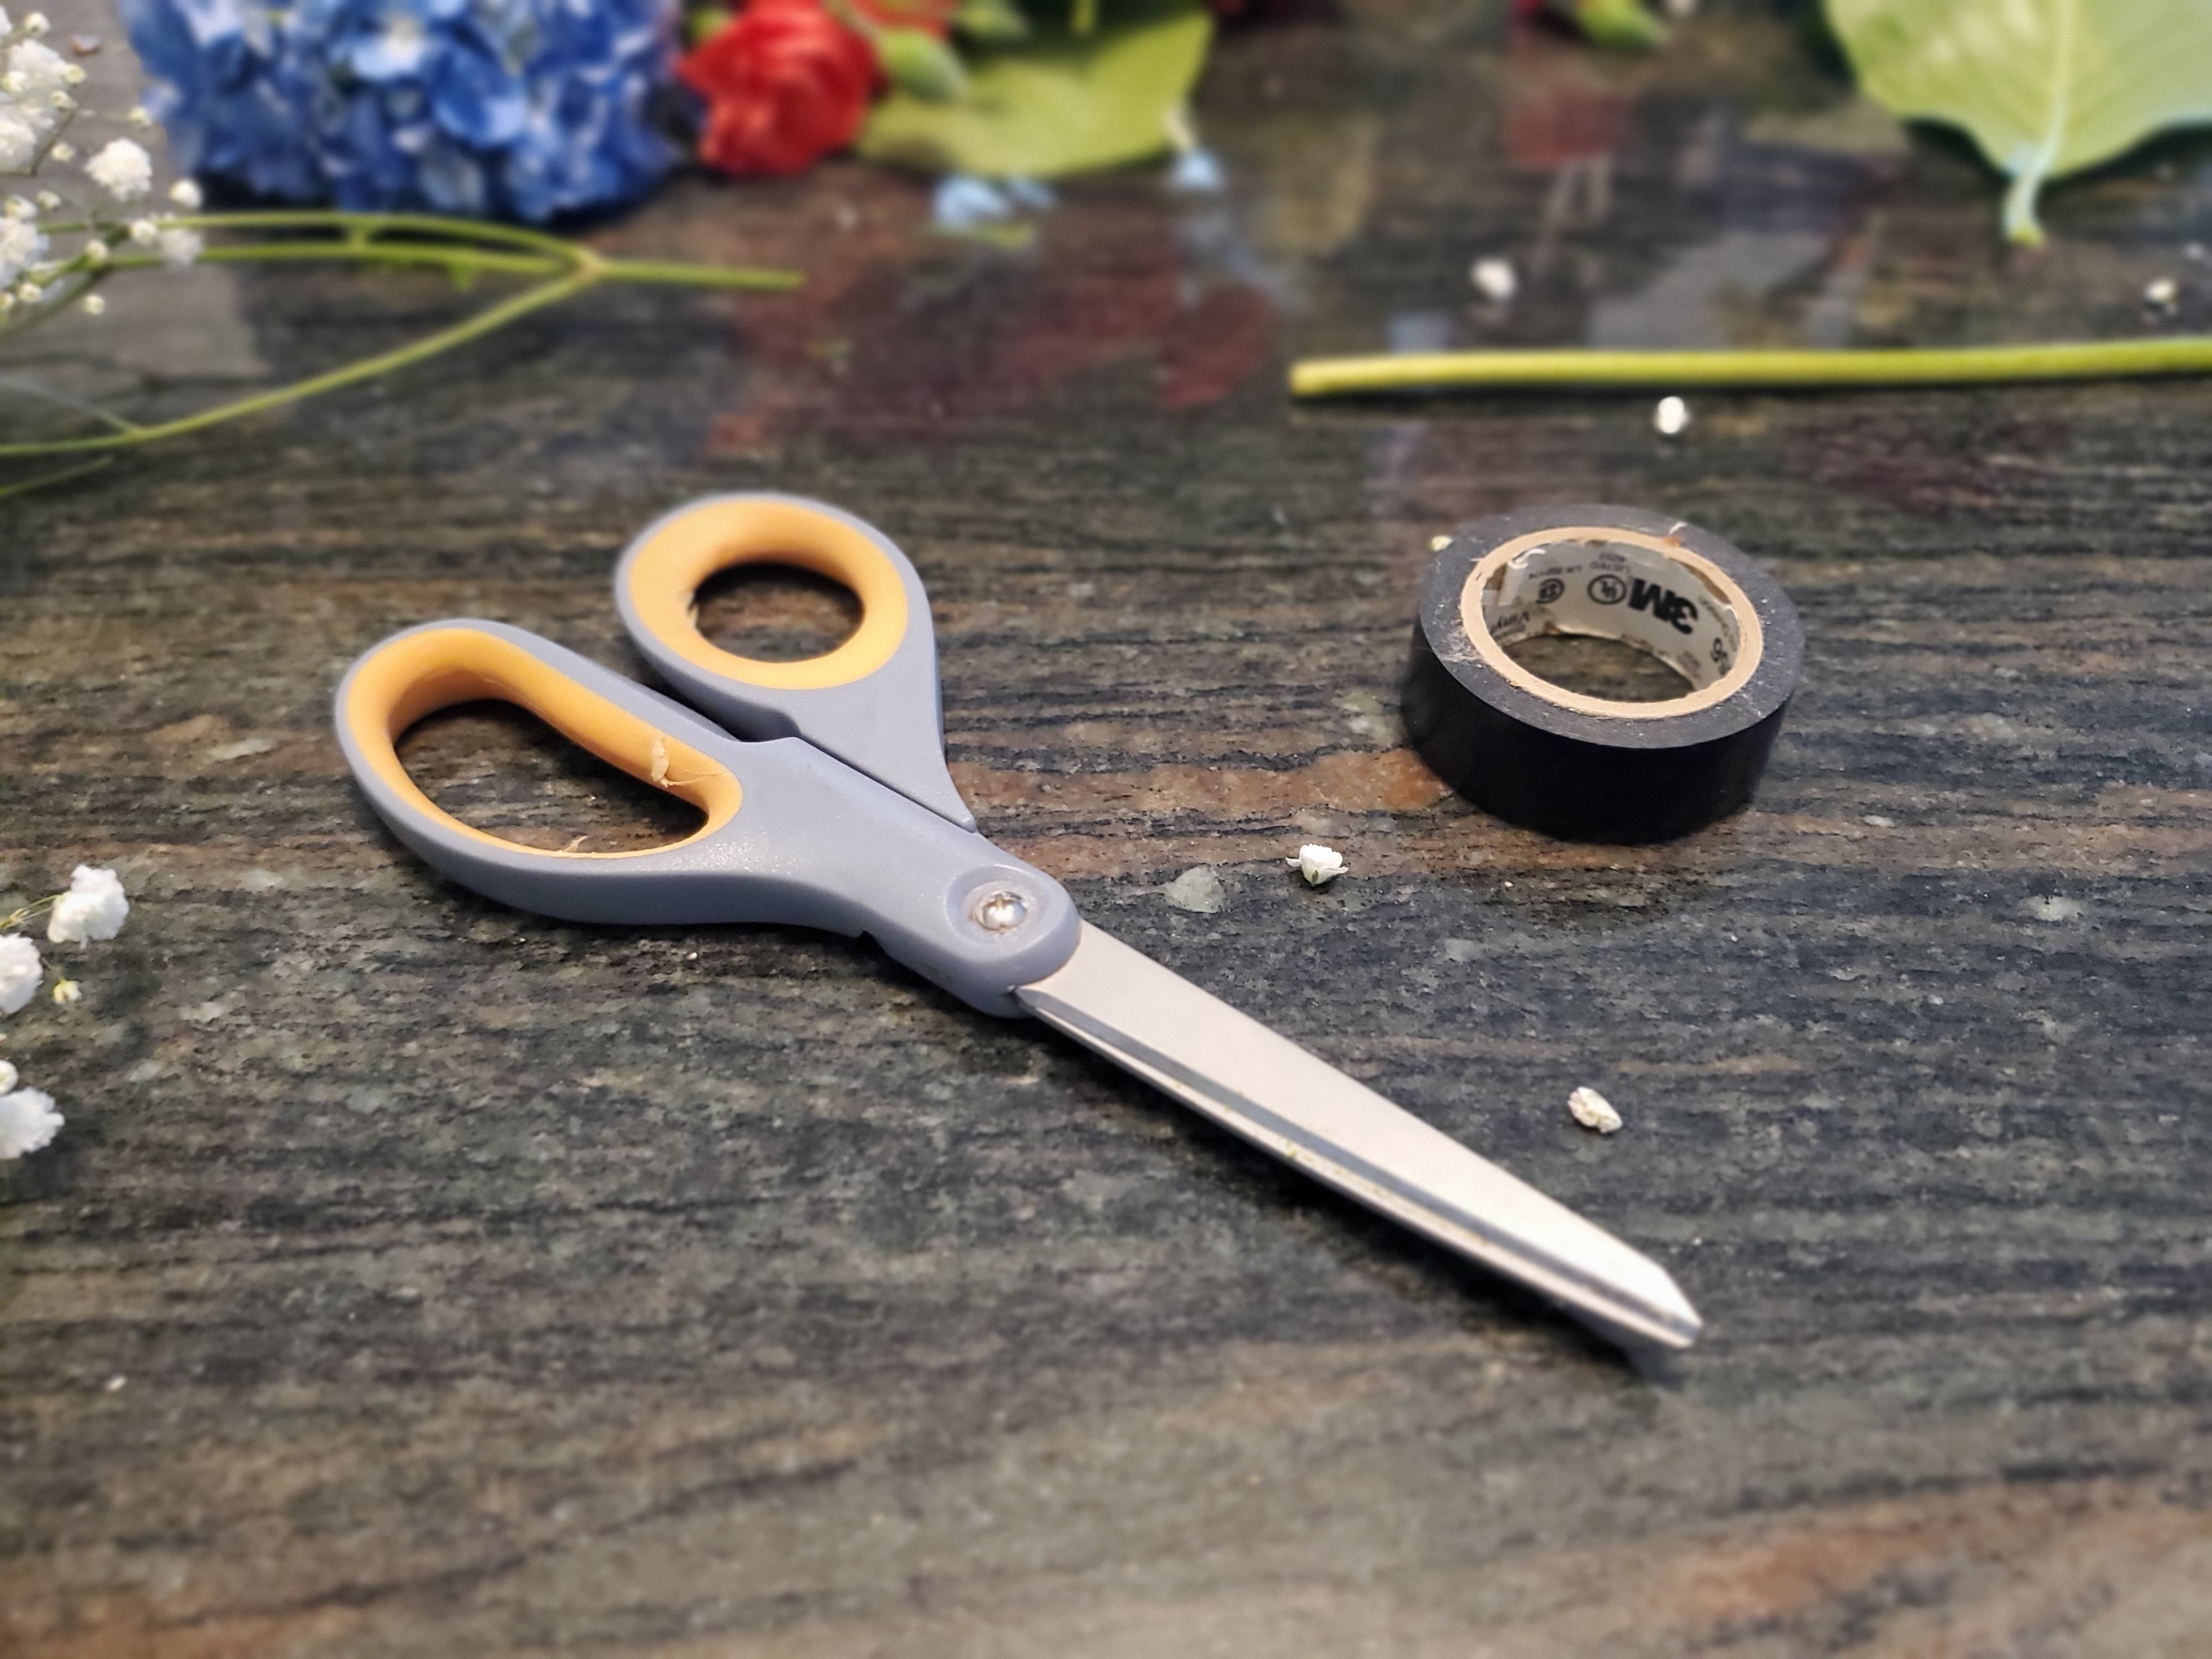 A pair of scissors and some floral tape